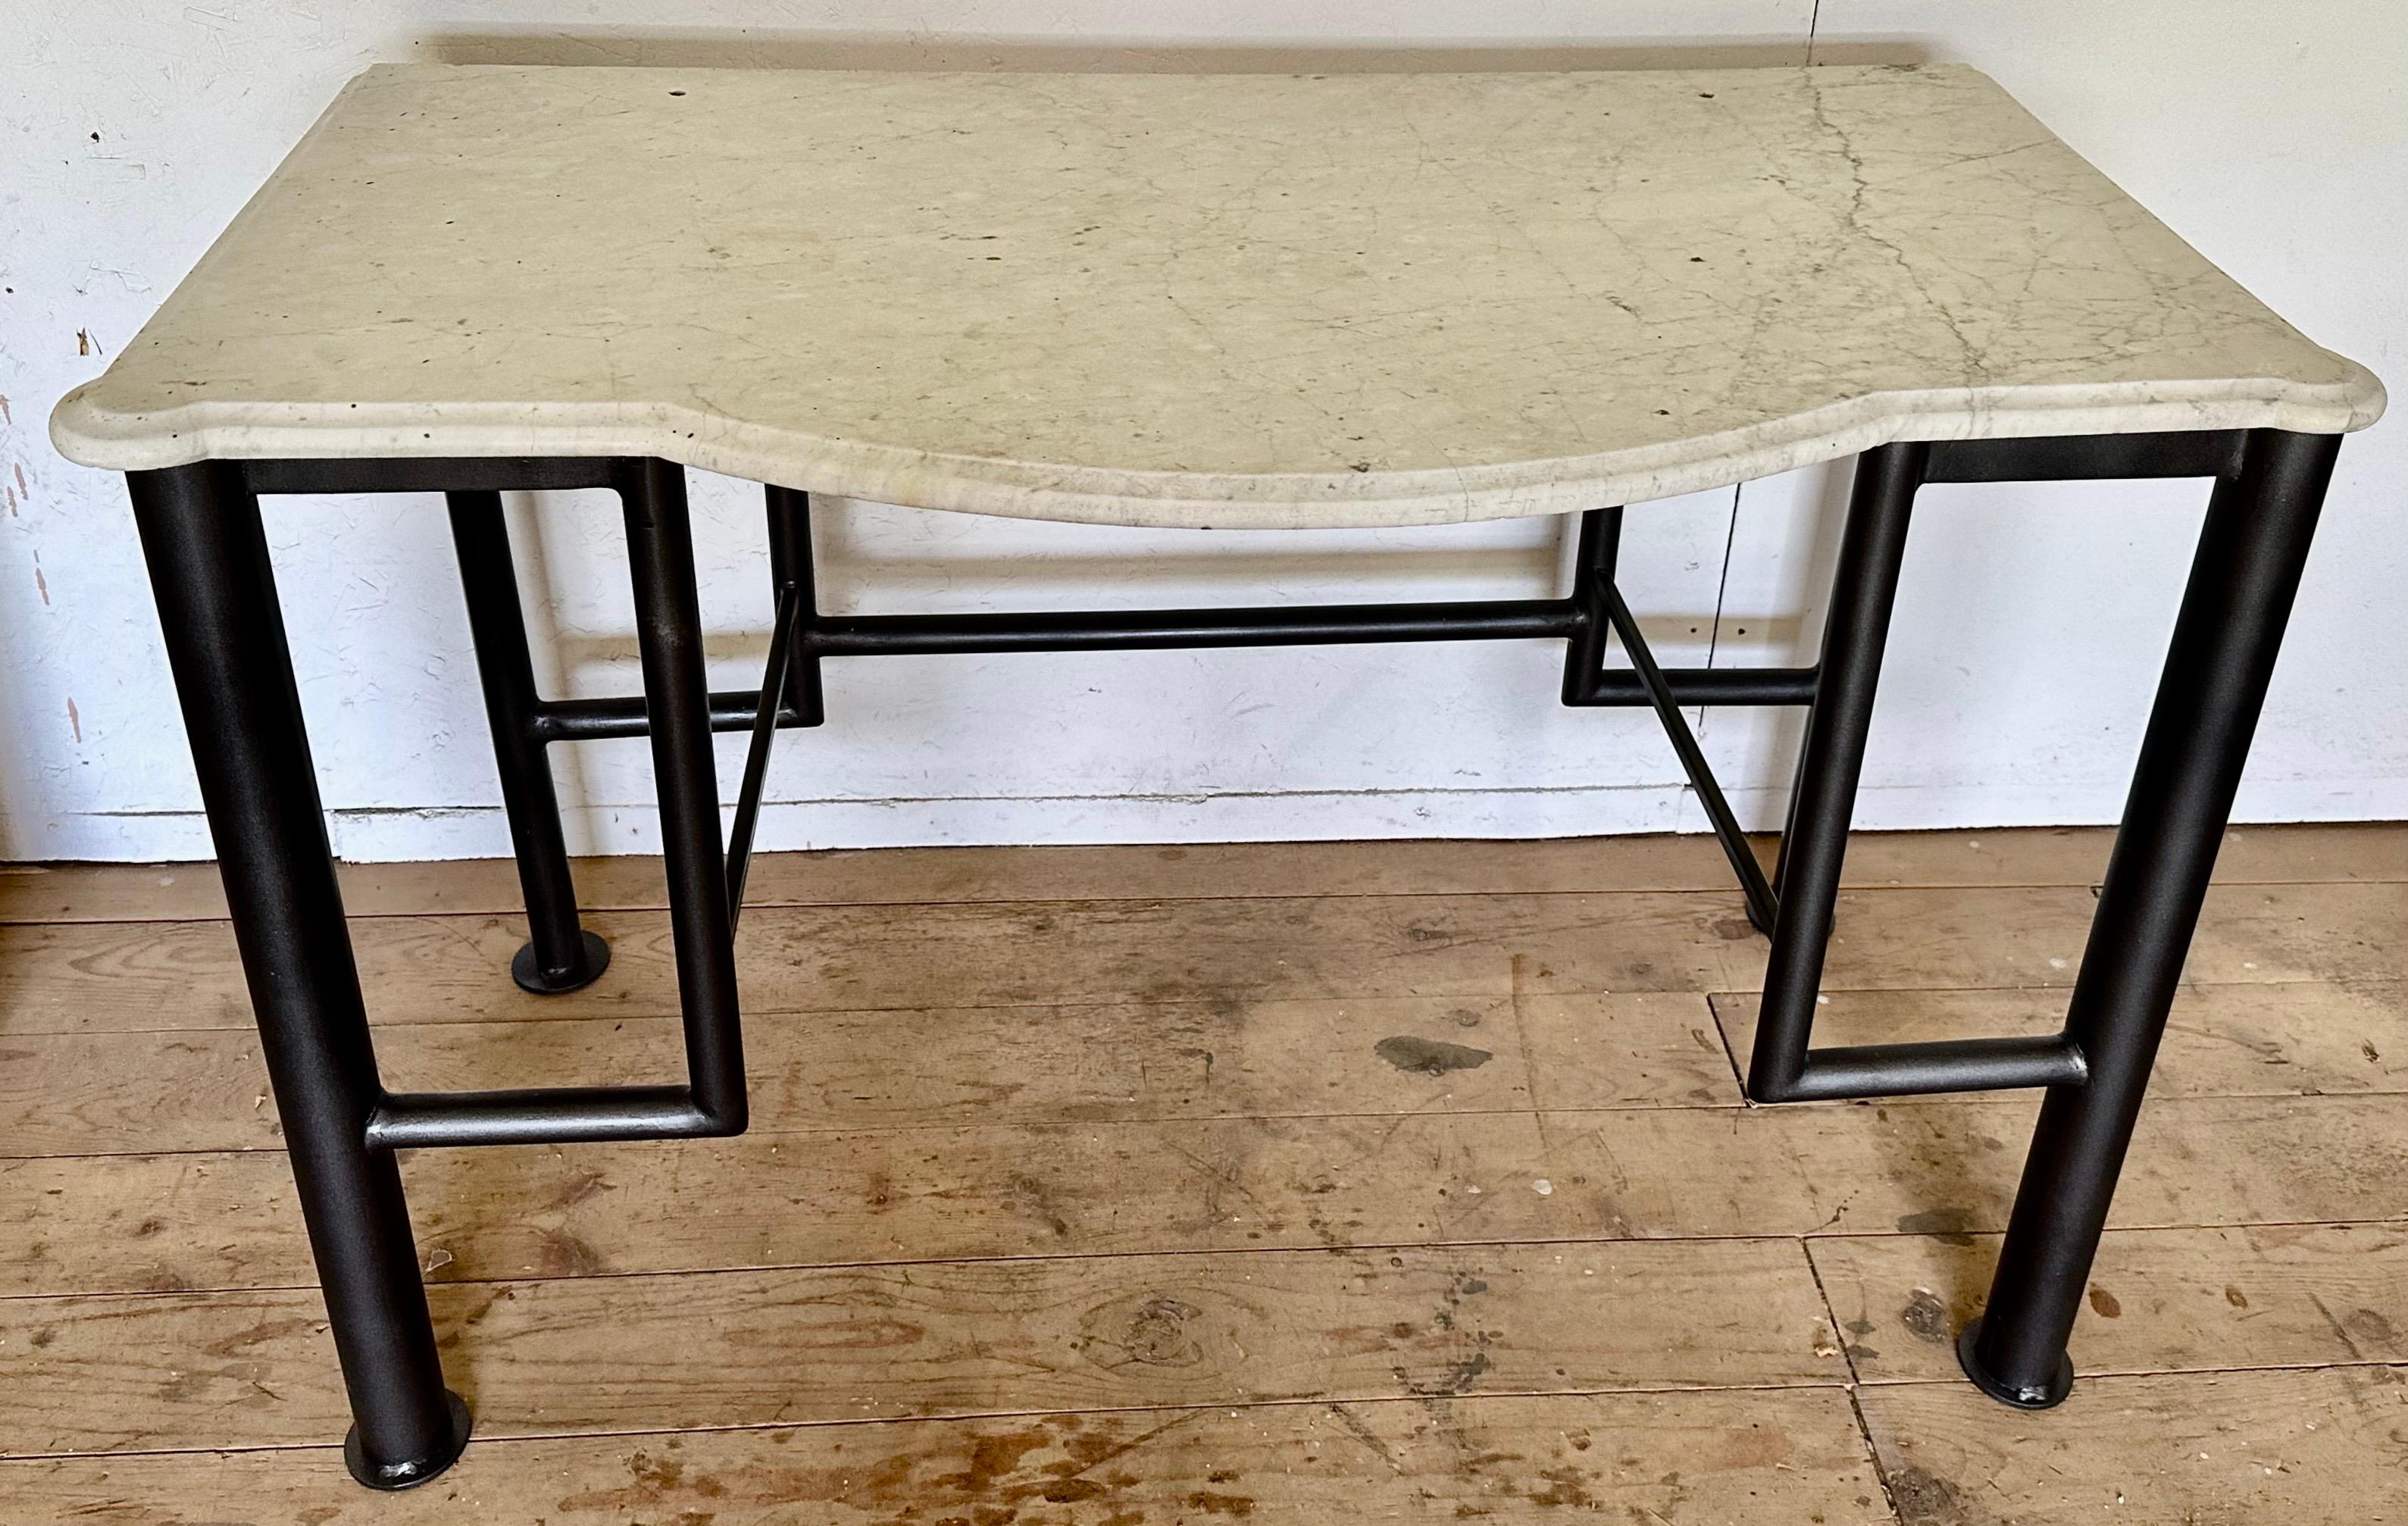 Make a statement with this unusual washstand created by combining the antique French marble top with rounded corners and half round front and a mid-century modern metal stand that has been newly refinished.
Use it as it or as a base with vessel wash